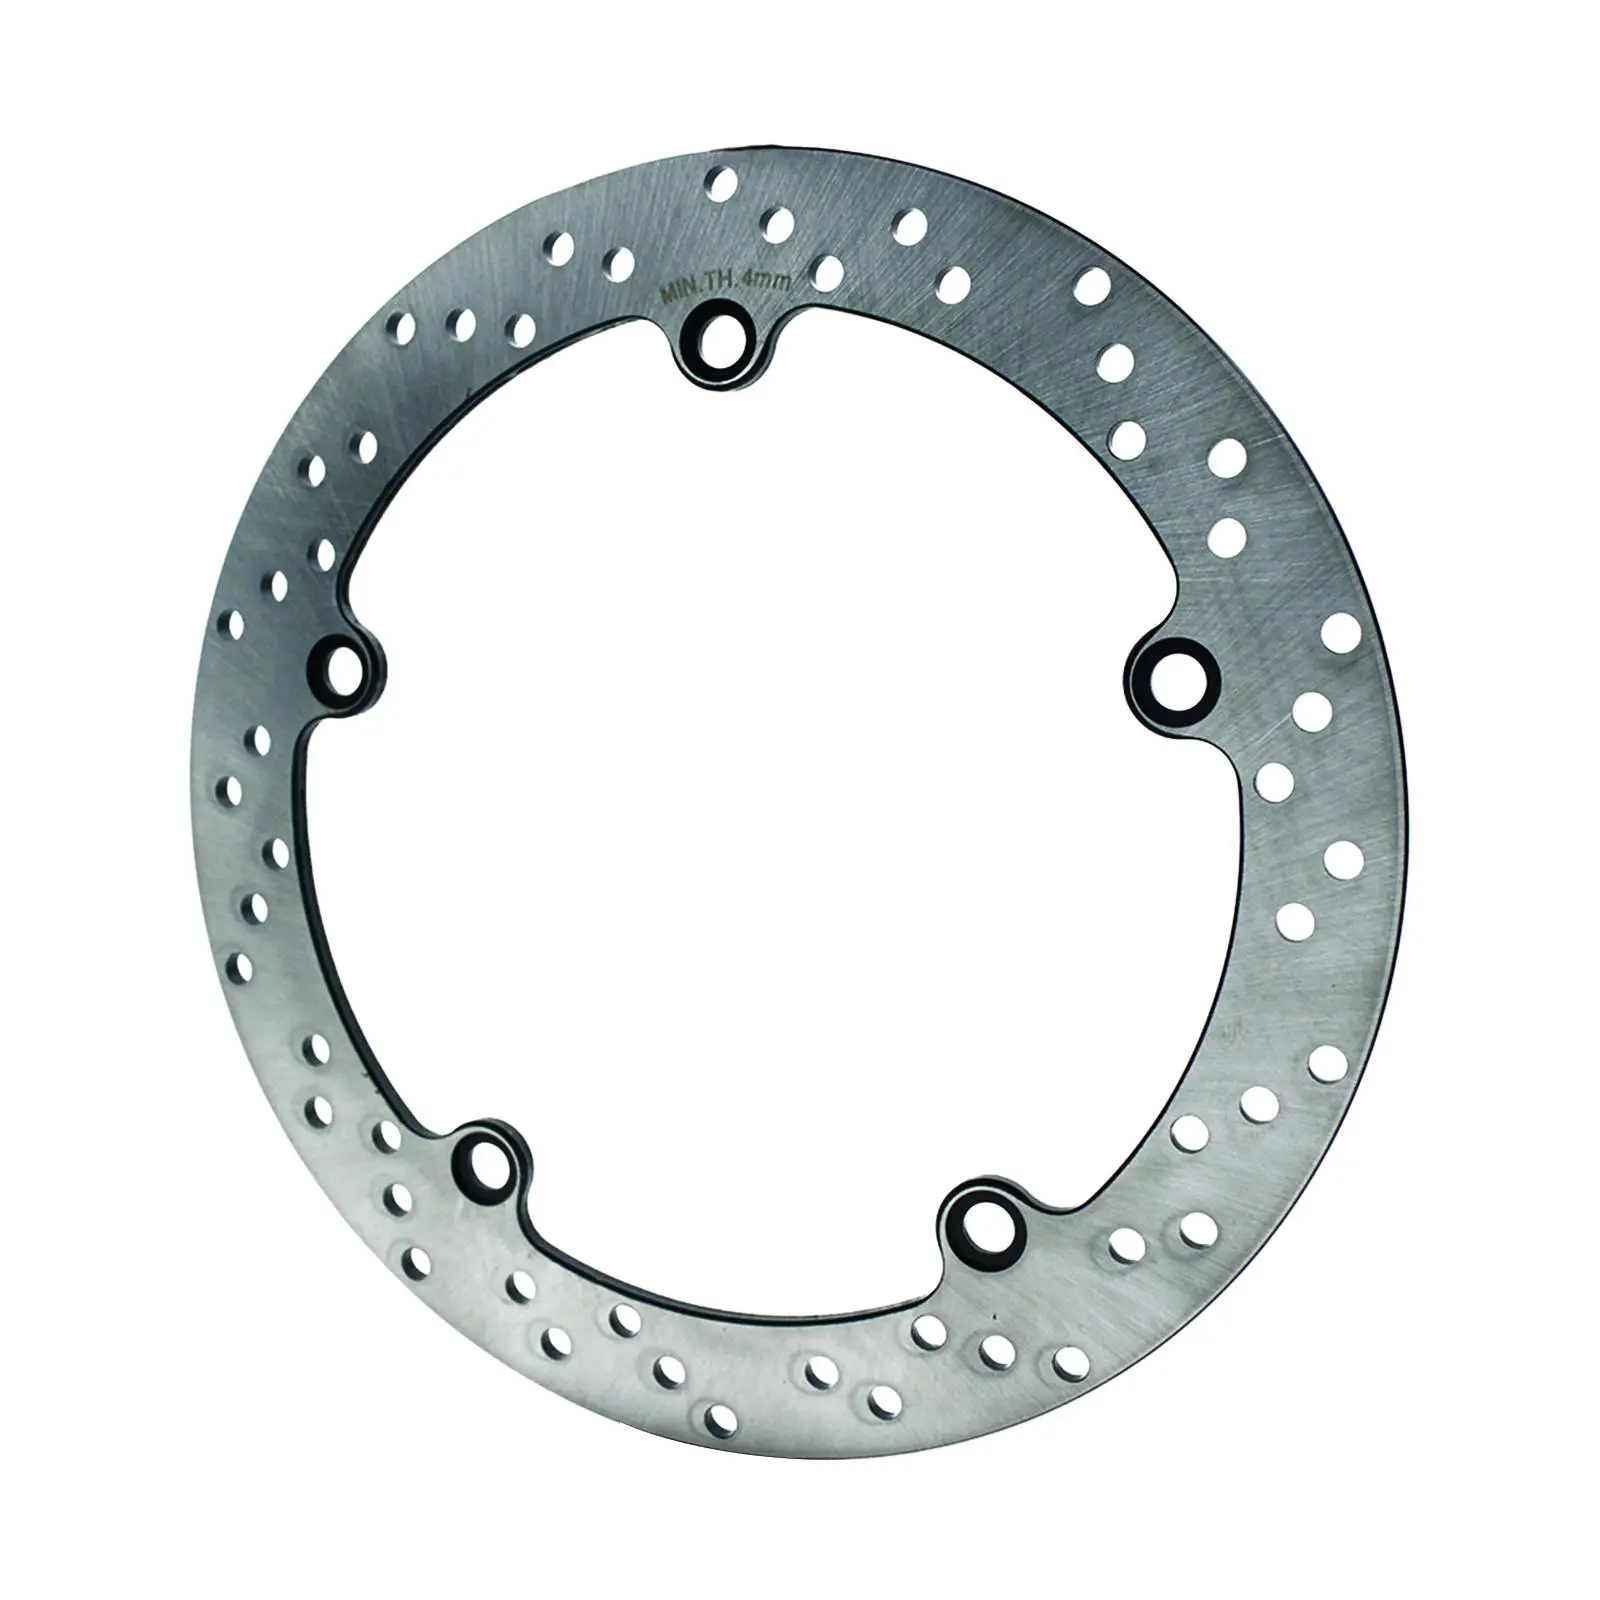 Motorcycle Rear Brake Disc Rotor for BMW R1100GS R1150RS R1150R Durable Direct